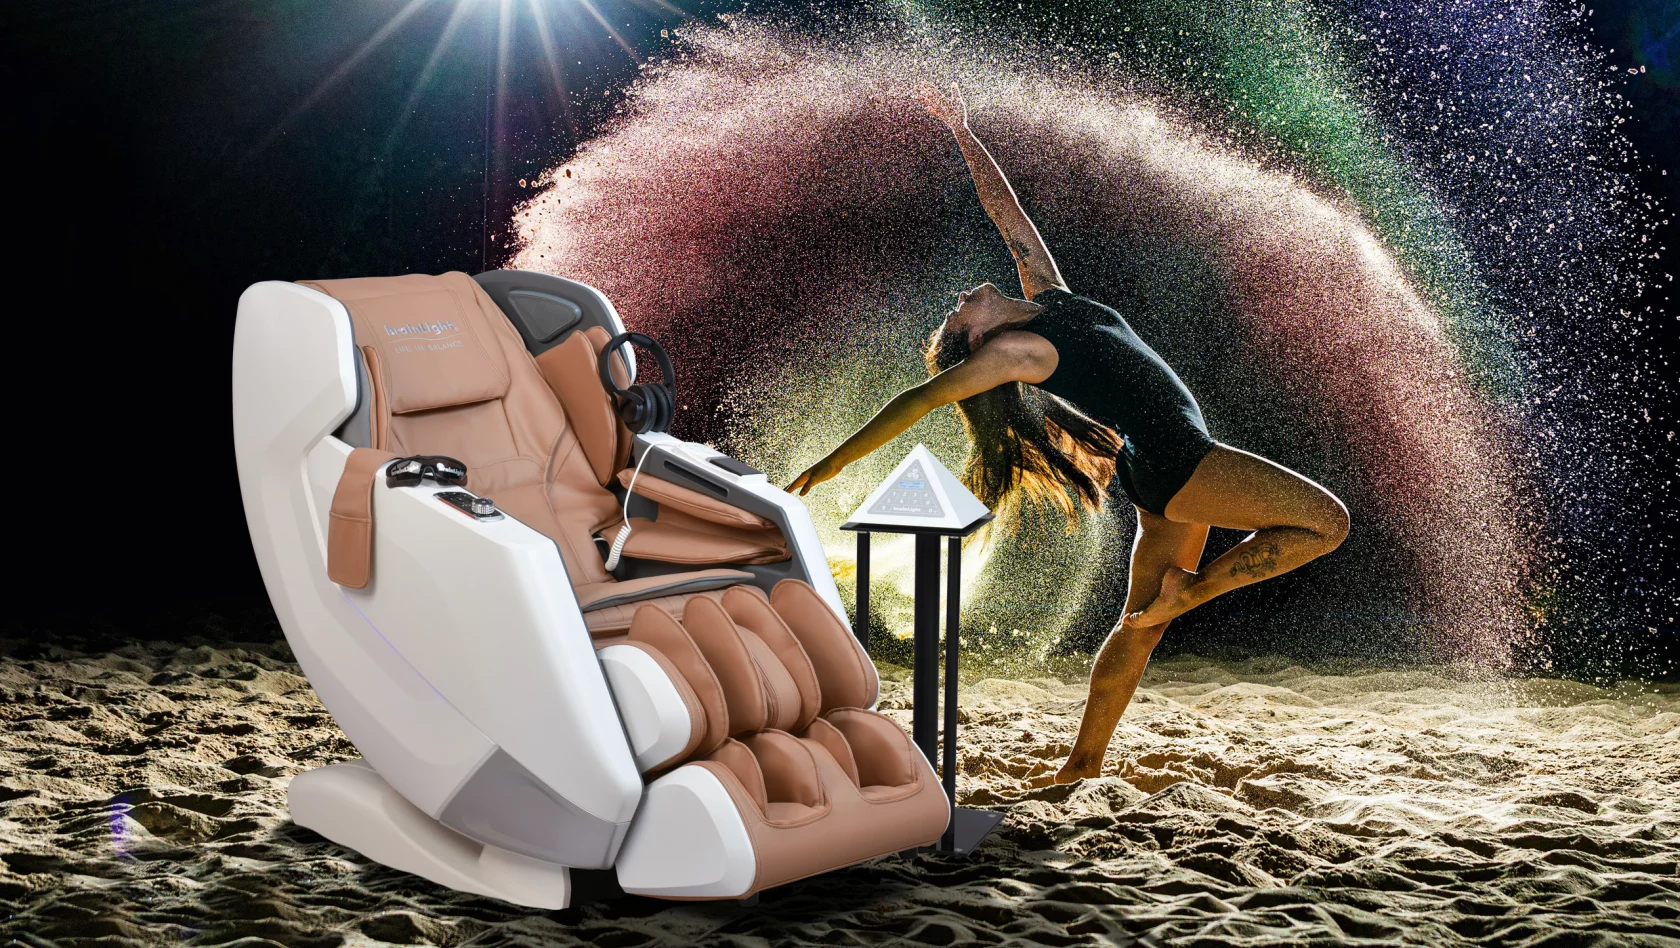 brainLight-Relaxation-Technology – so much more than simply a massage chair